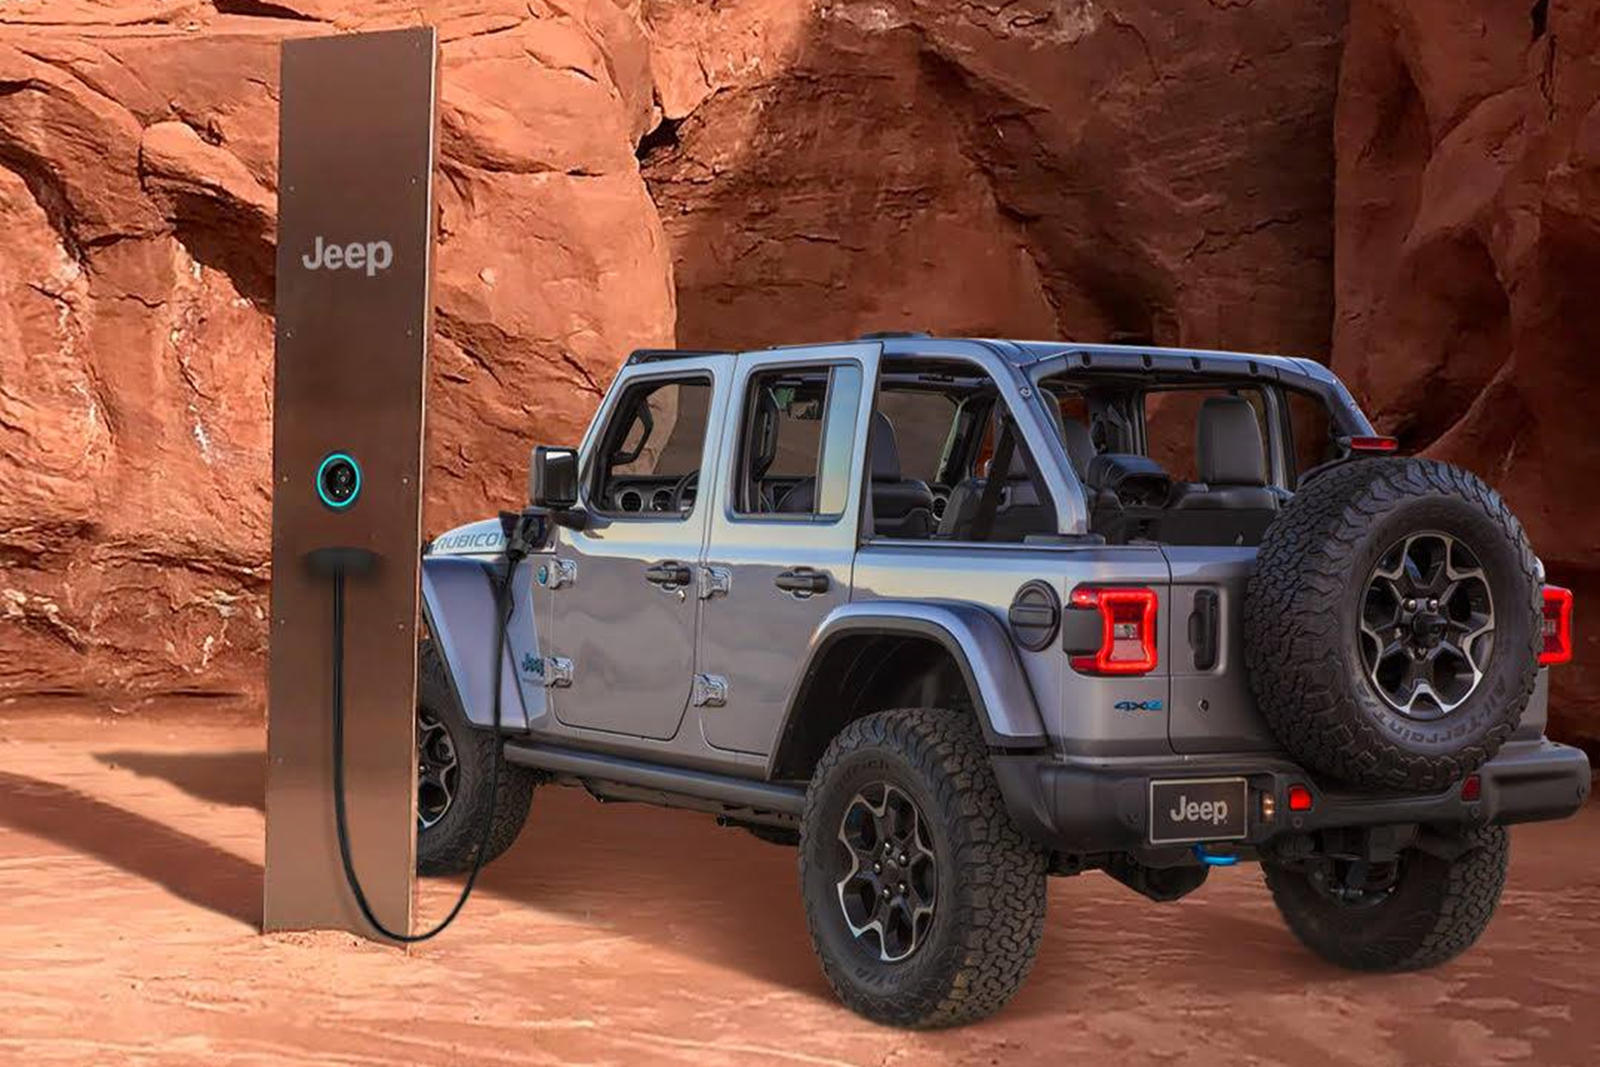 Magneto: The Electric Jeep Wrangler Could Get A Supervillain Name | CarBuzz